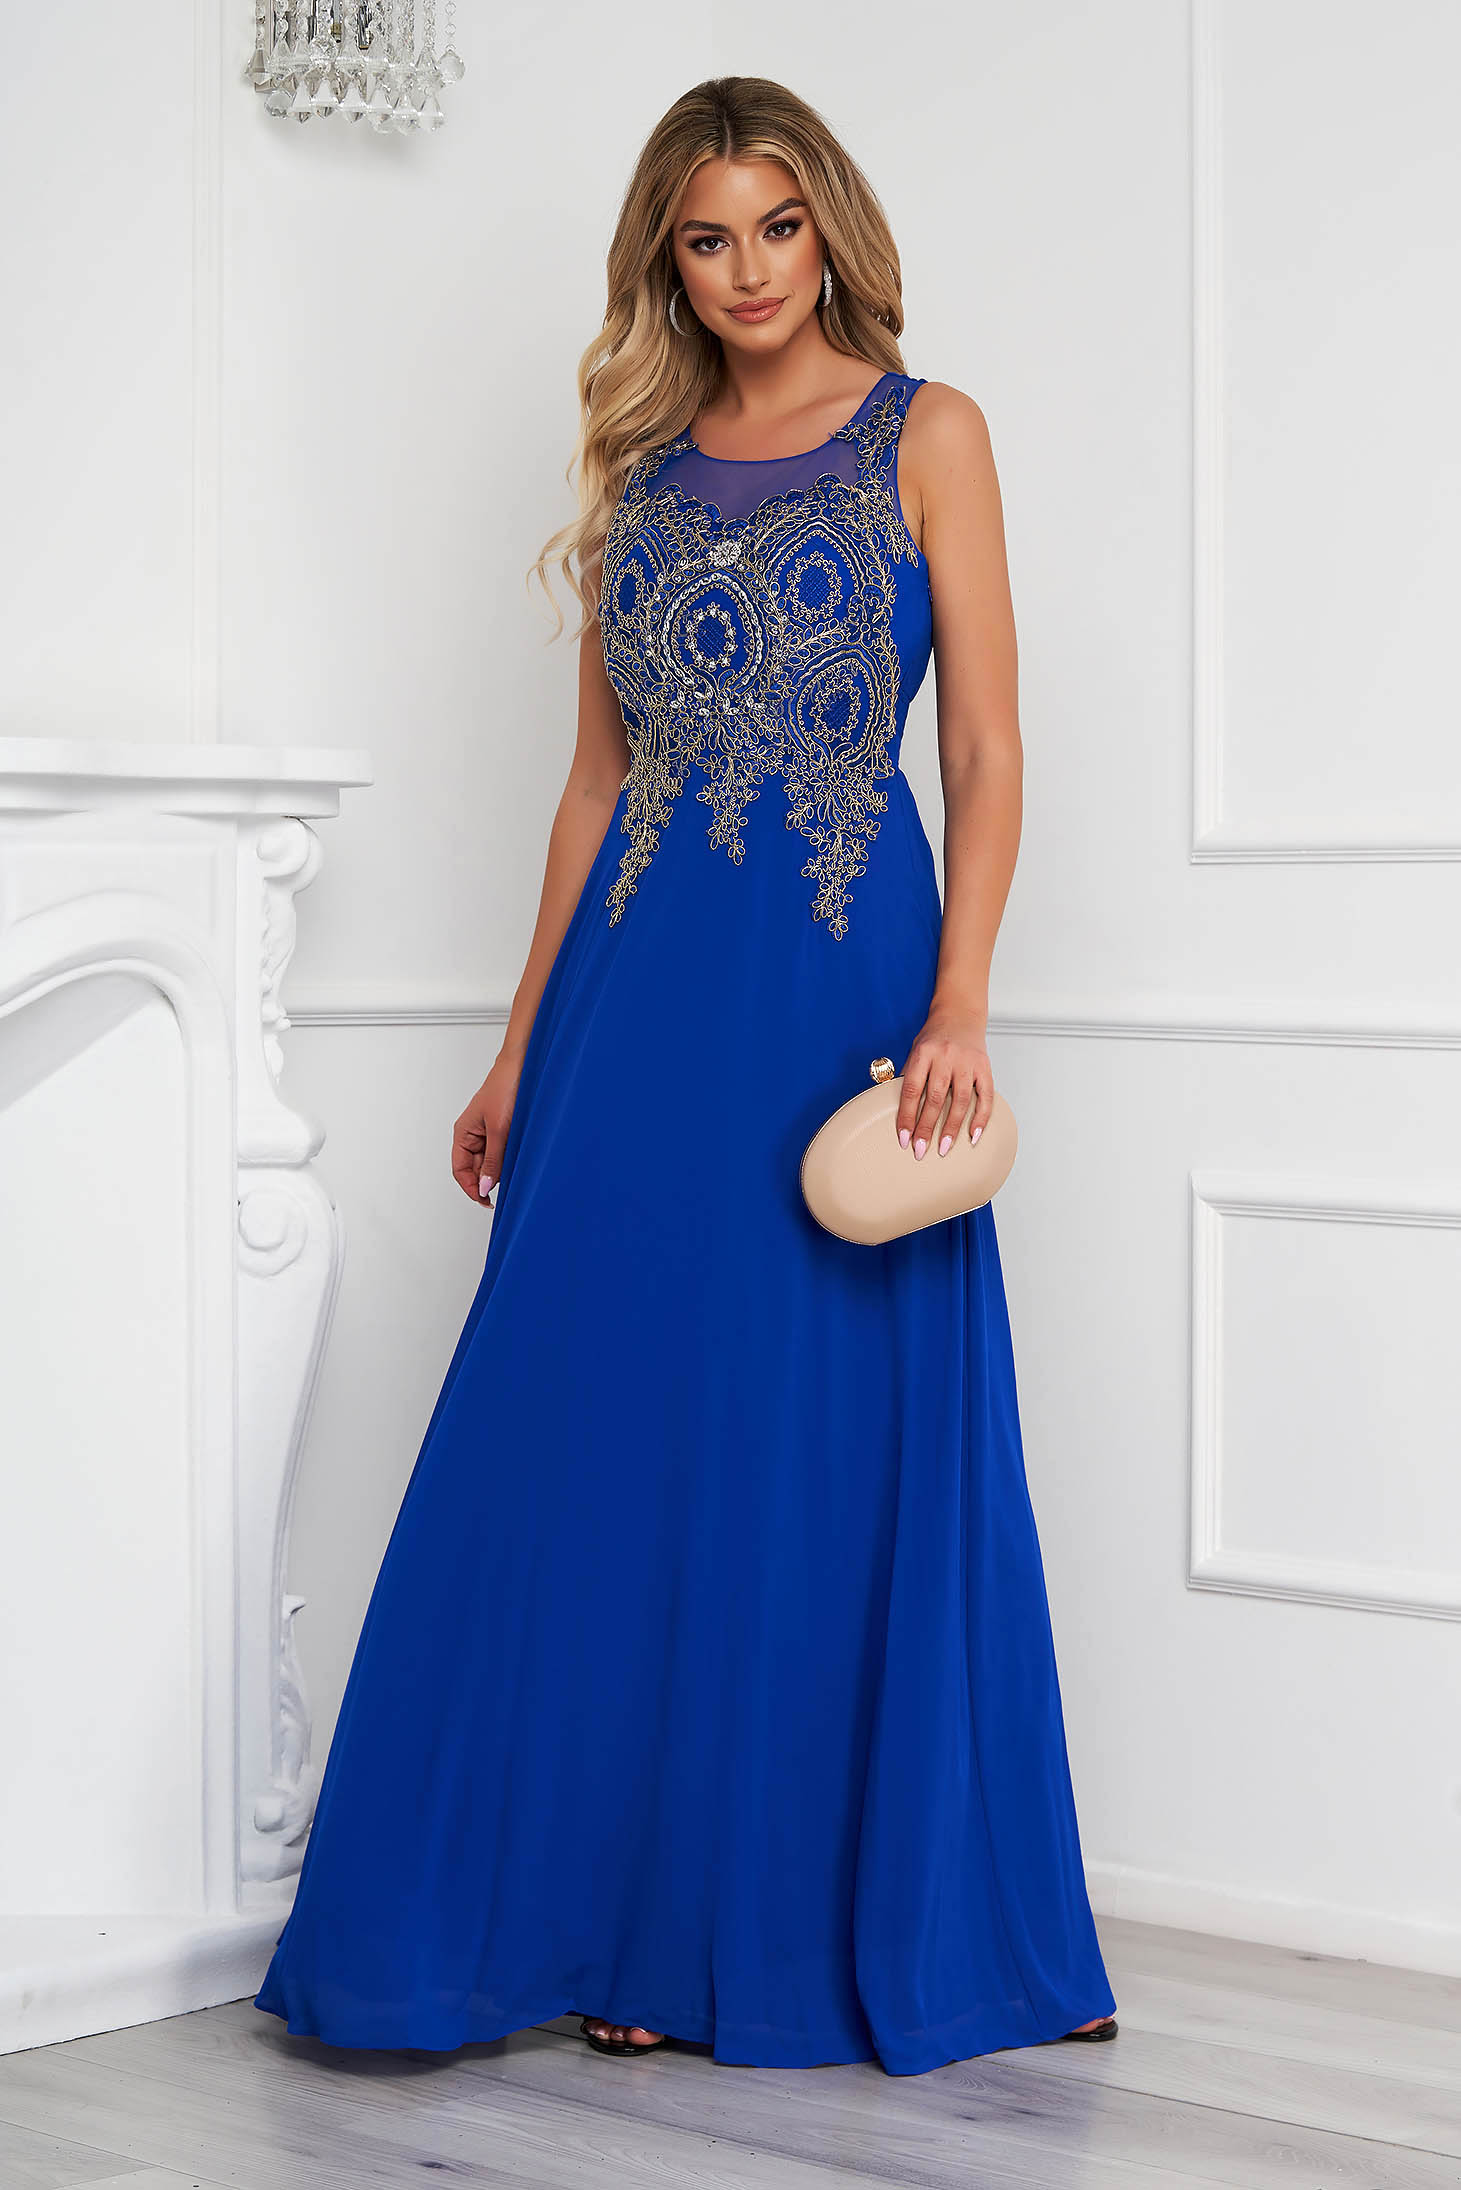 Blue dress long occasional cloche from tulle front embroidery with crystal embellished details